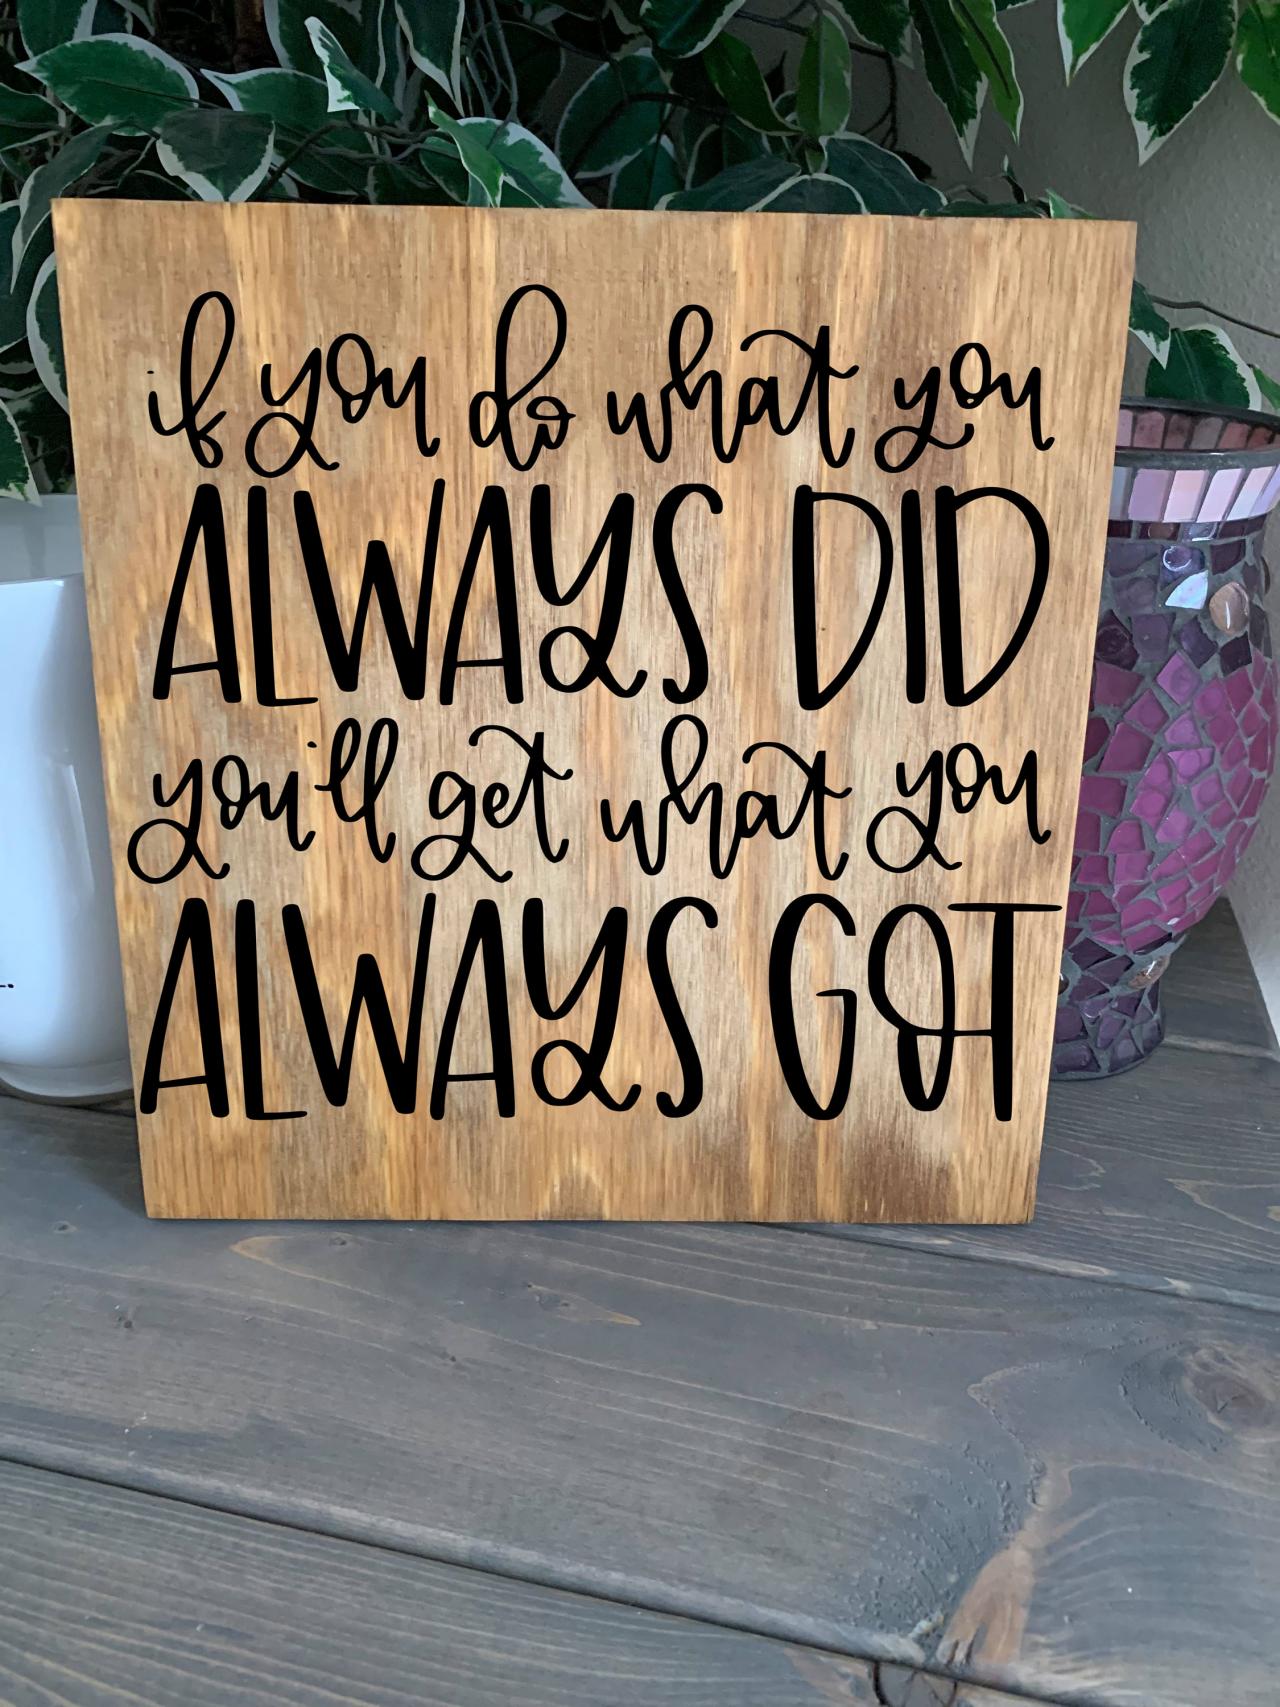 If You Do What You Always Did. You'll Get What You Always Got. Stained And Hand Painted Wood 12x12 Sign